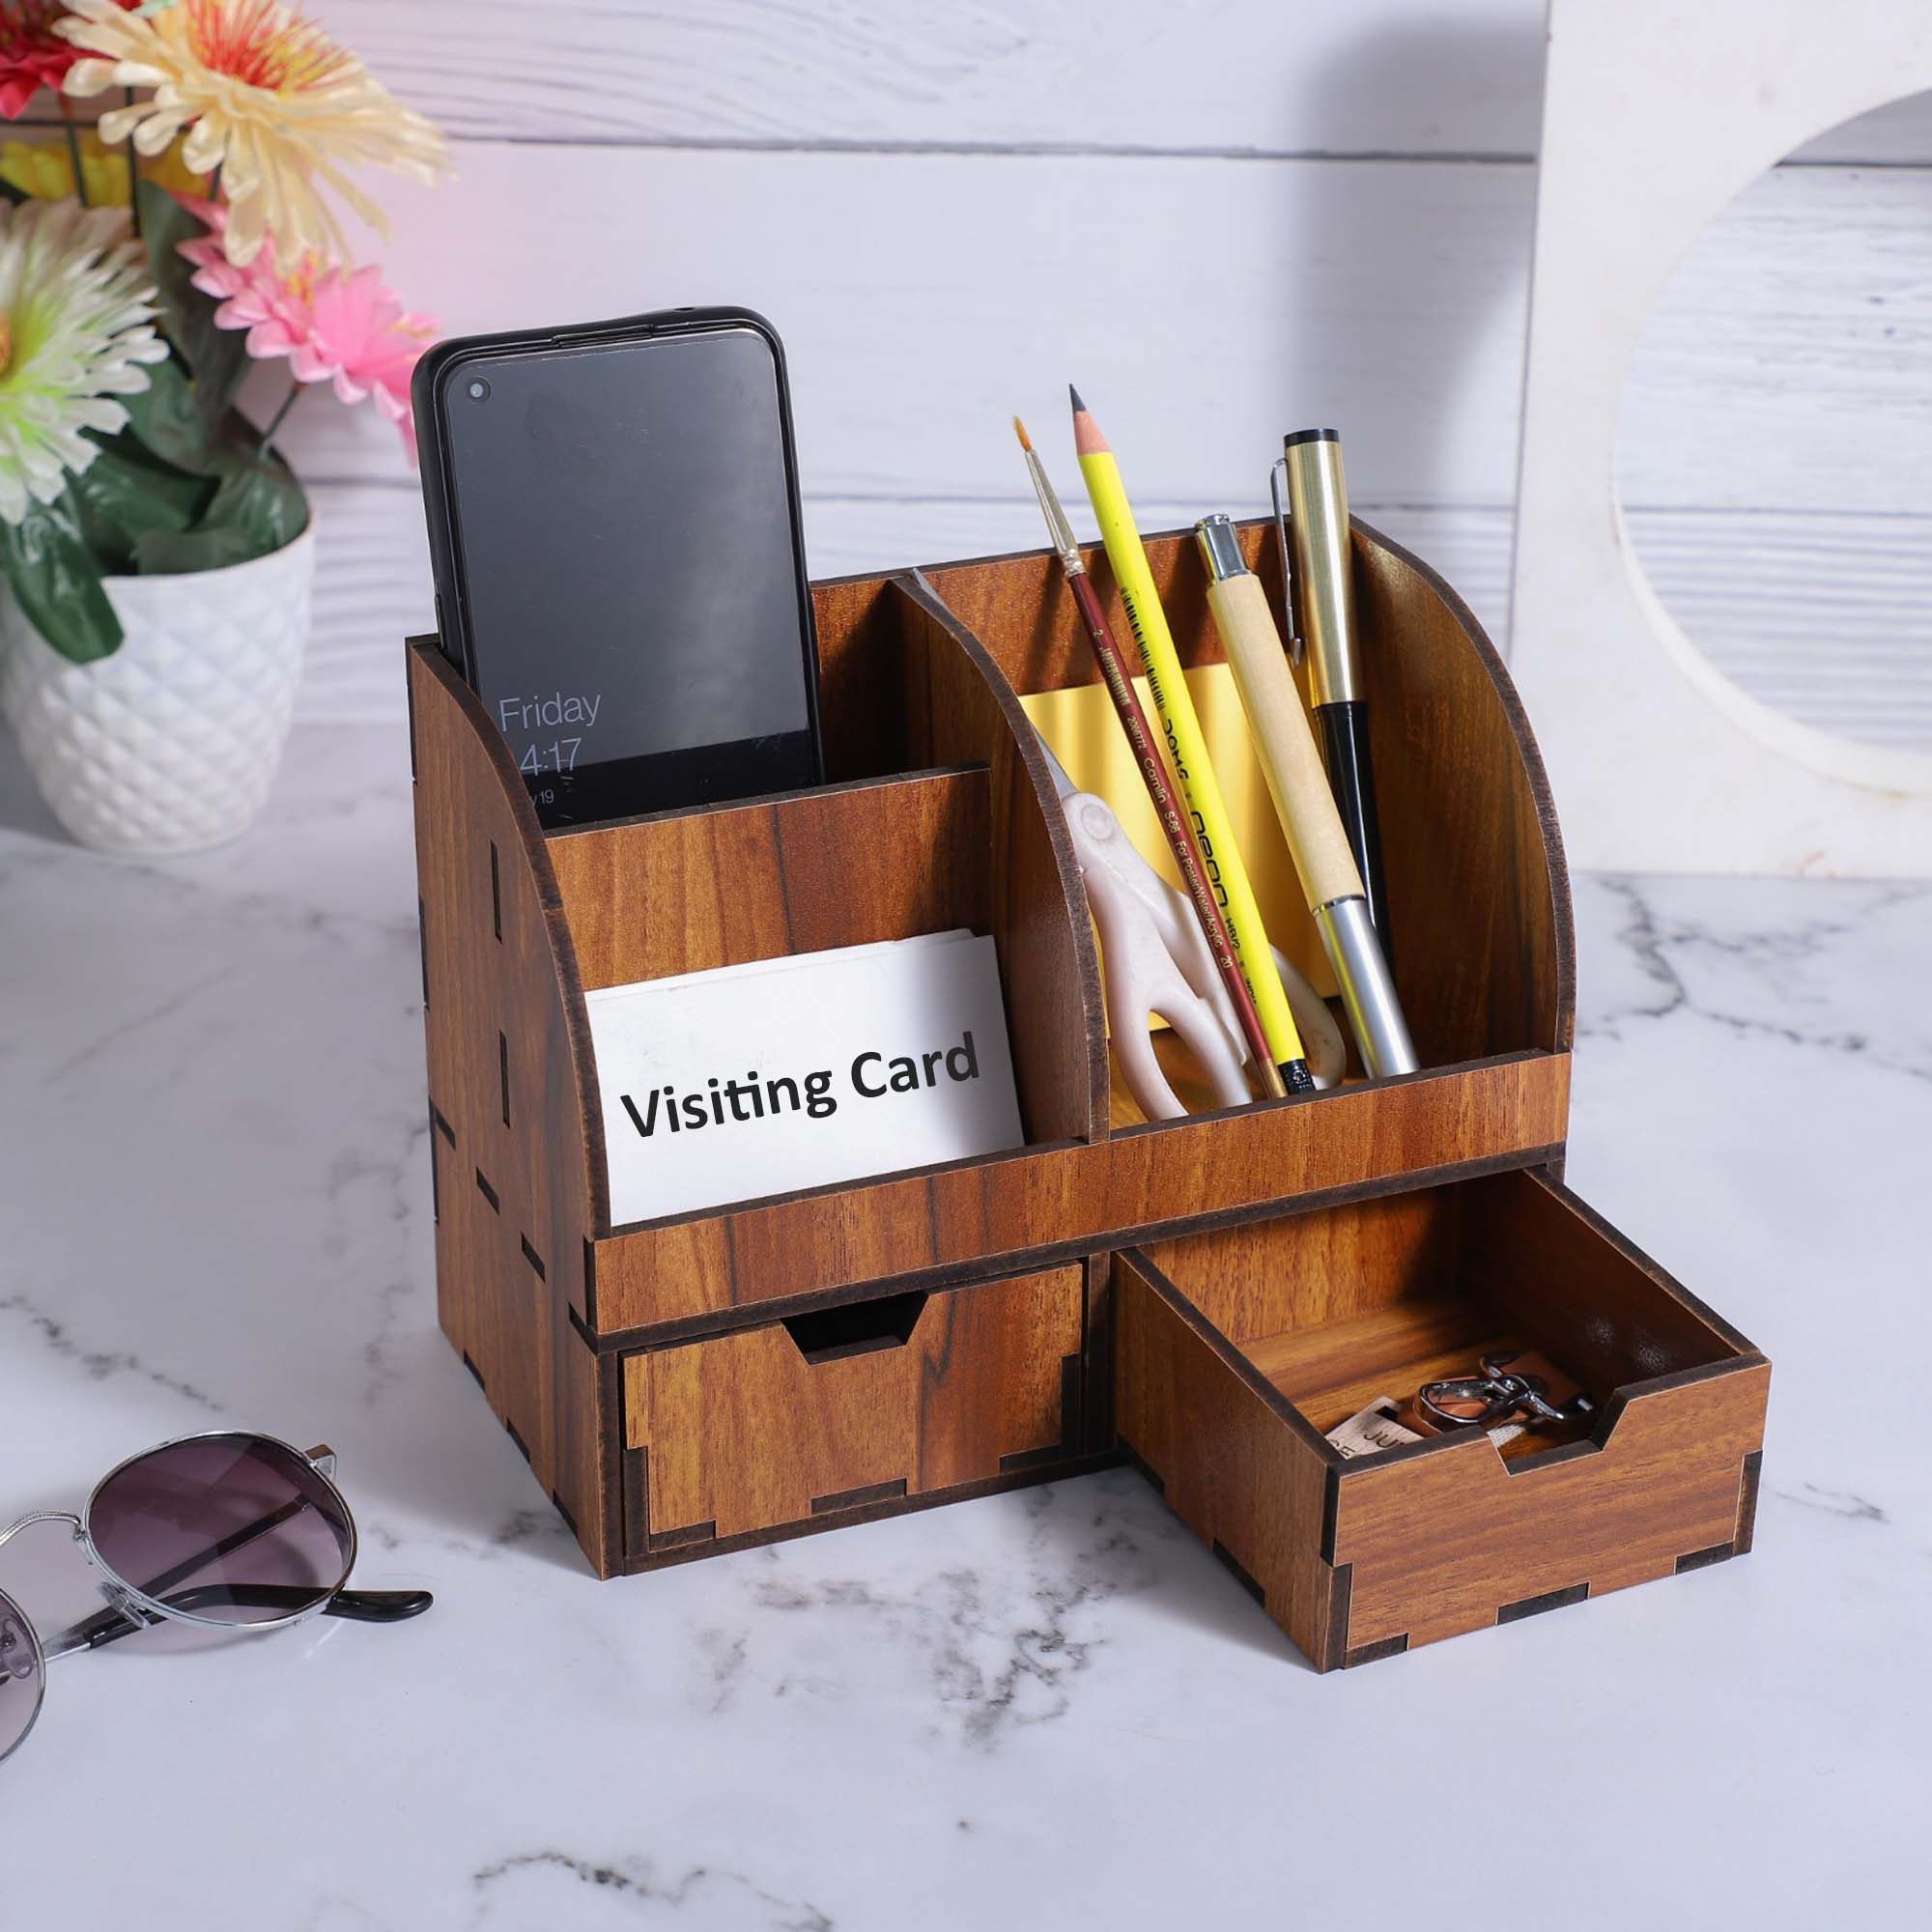 Desk Stationary Organizer with Sticky Notes, Mobile, Visiting Card Holder and Drawers for Office Desk and Study Table